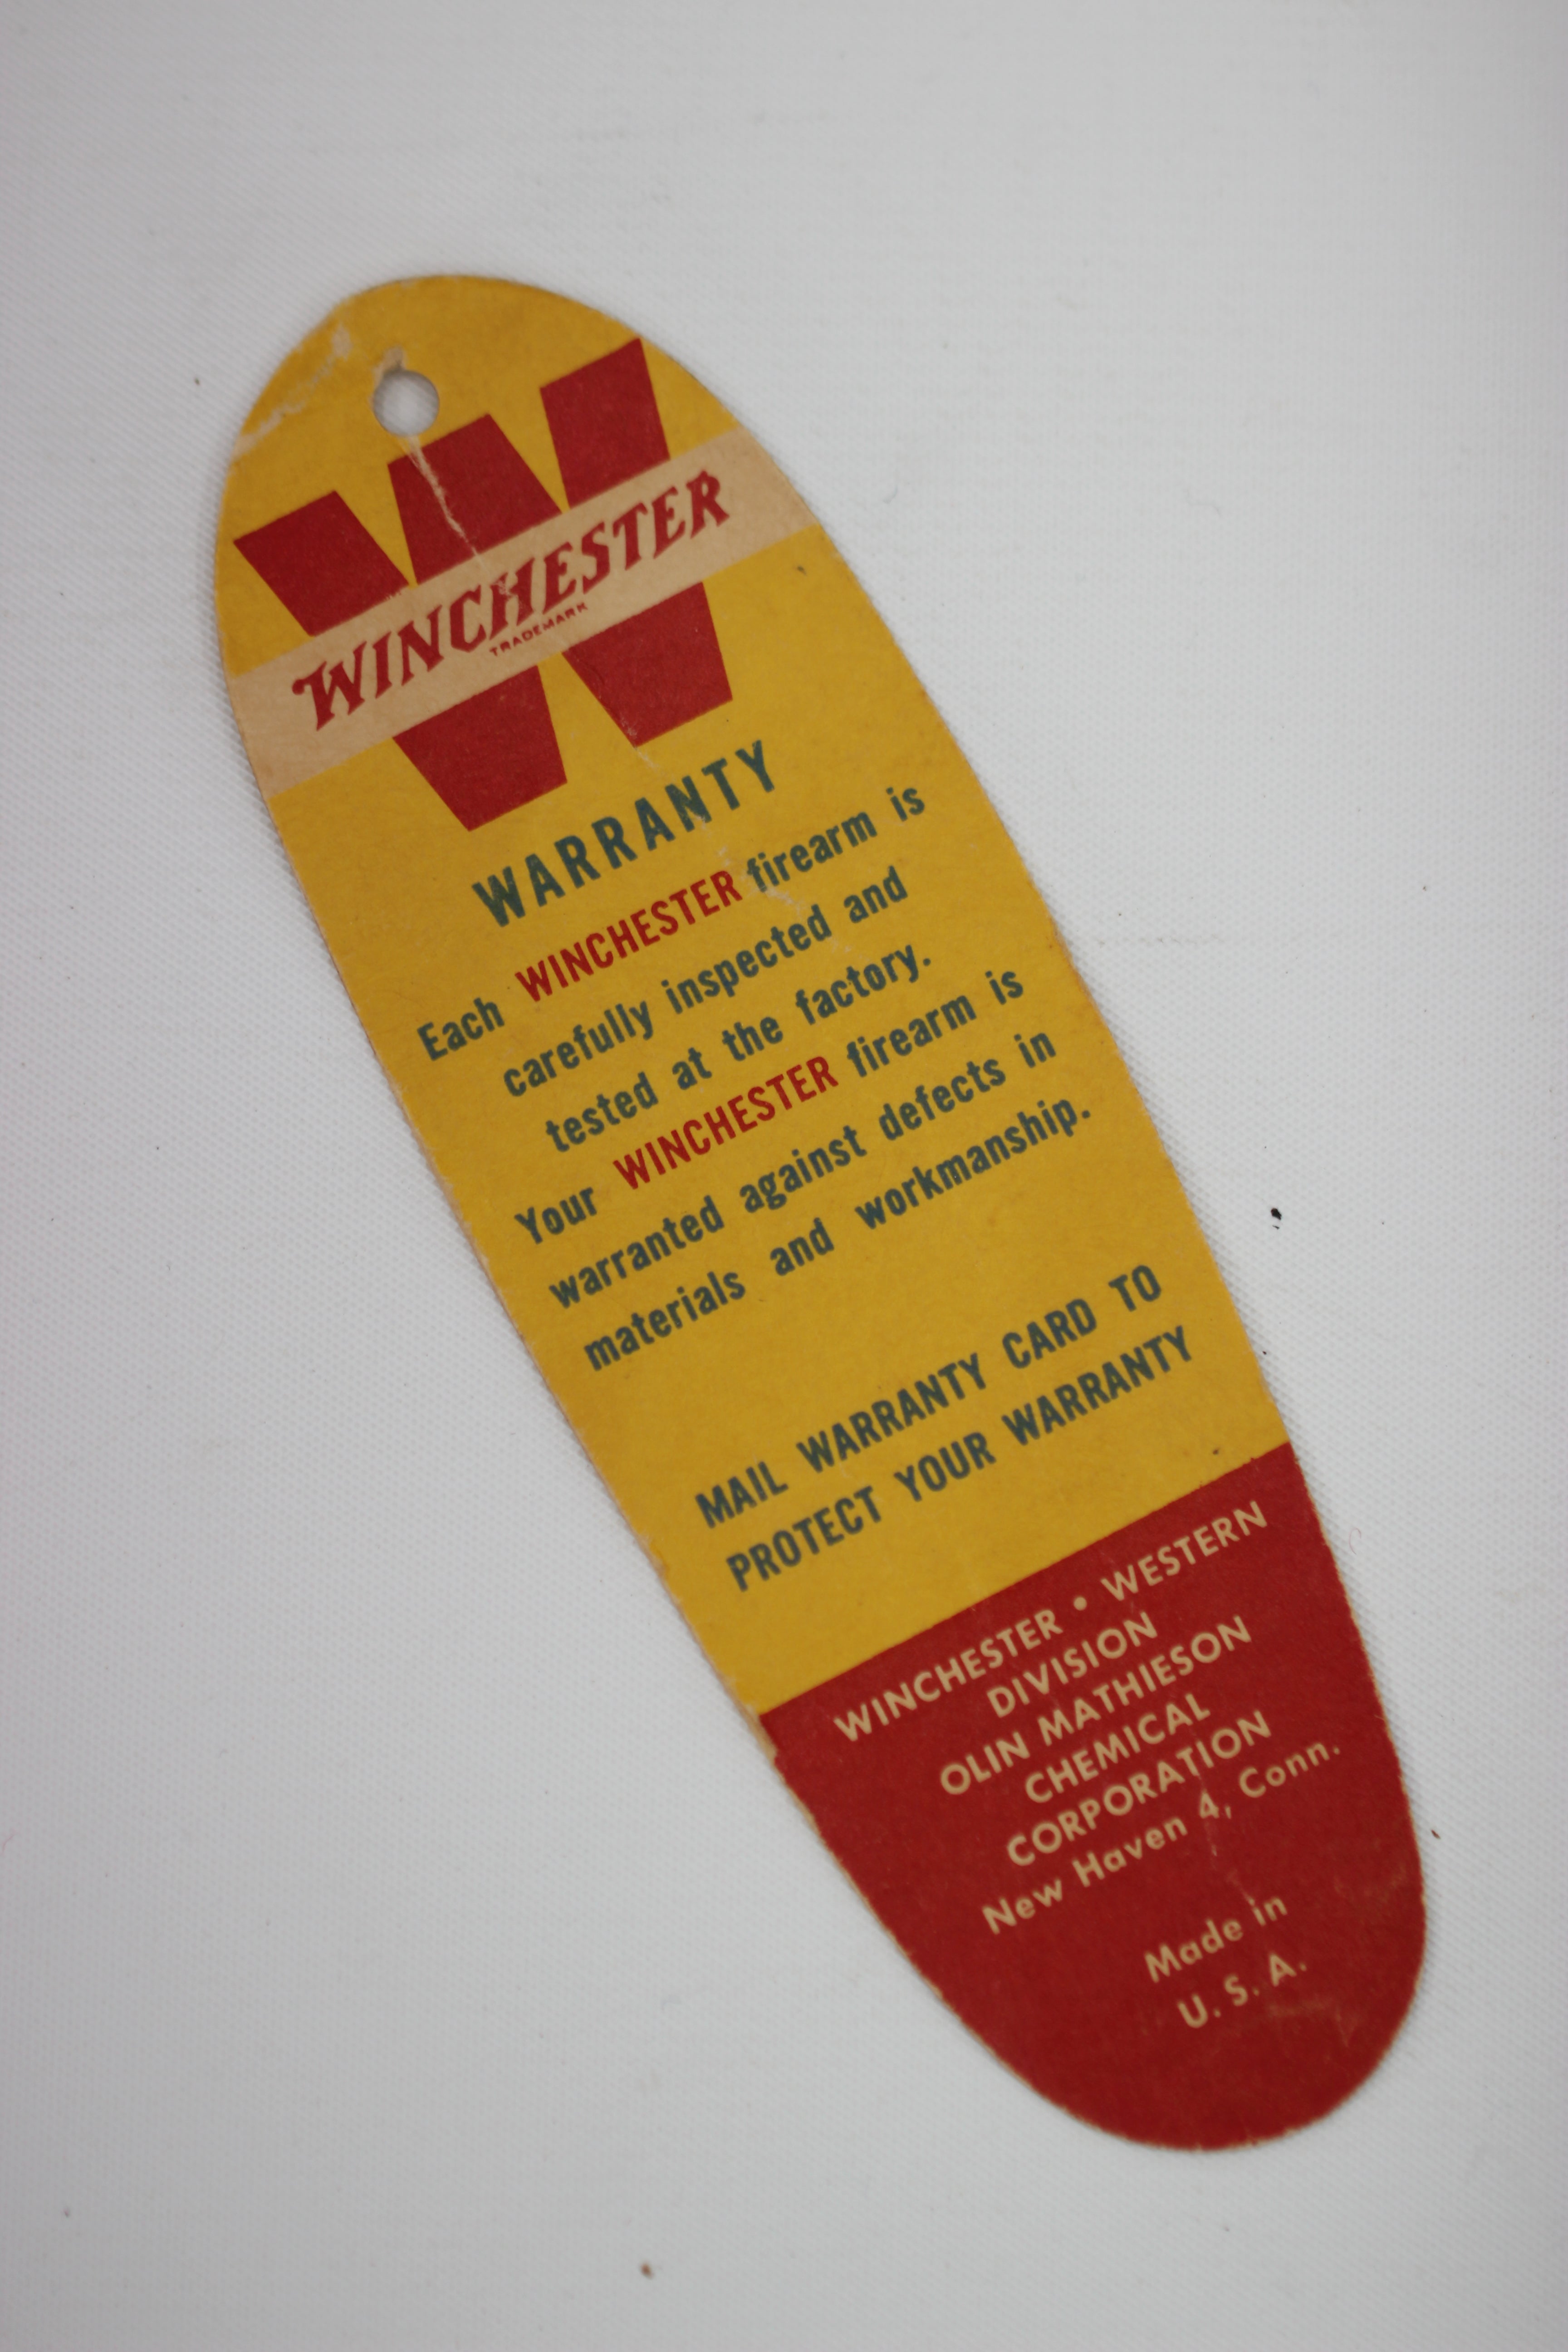 Winchester Model 70 Featherweight Hang Tag - Symbol No. 7064